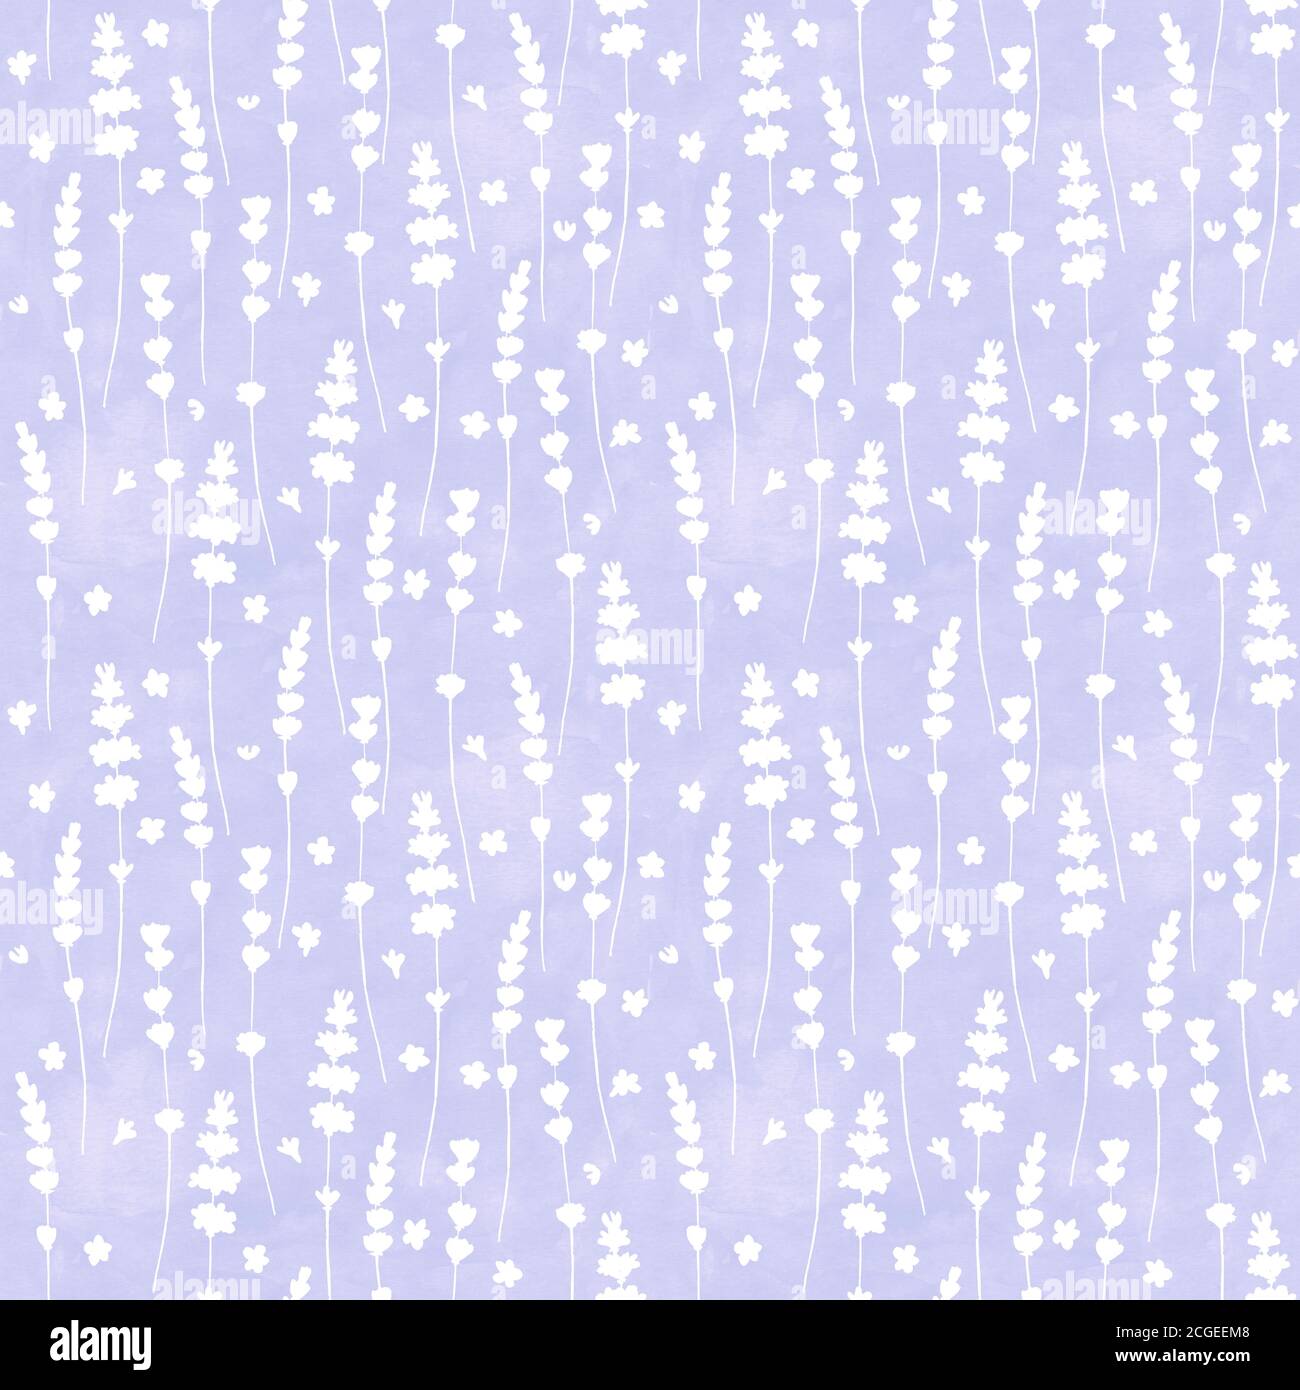 Lavender flowers white silhouettes seamless pattern on purple watercolor background. Watercolour hand drawn floral texture. Print for textile, wallpap Stock Photo